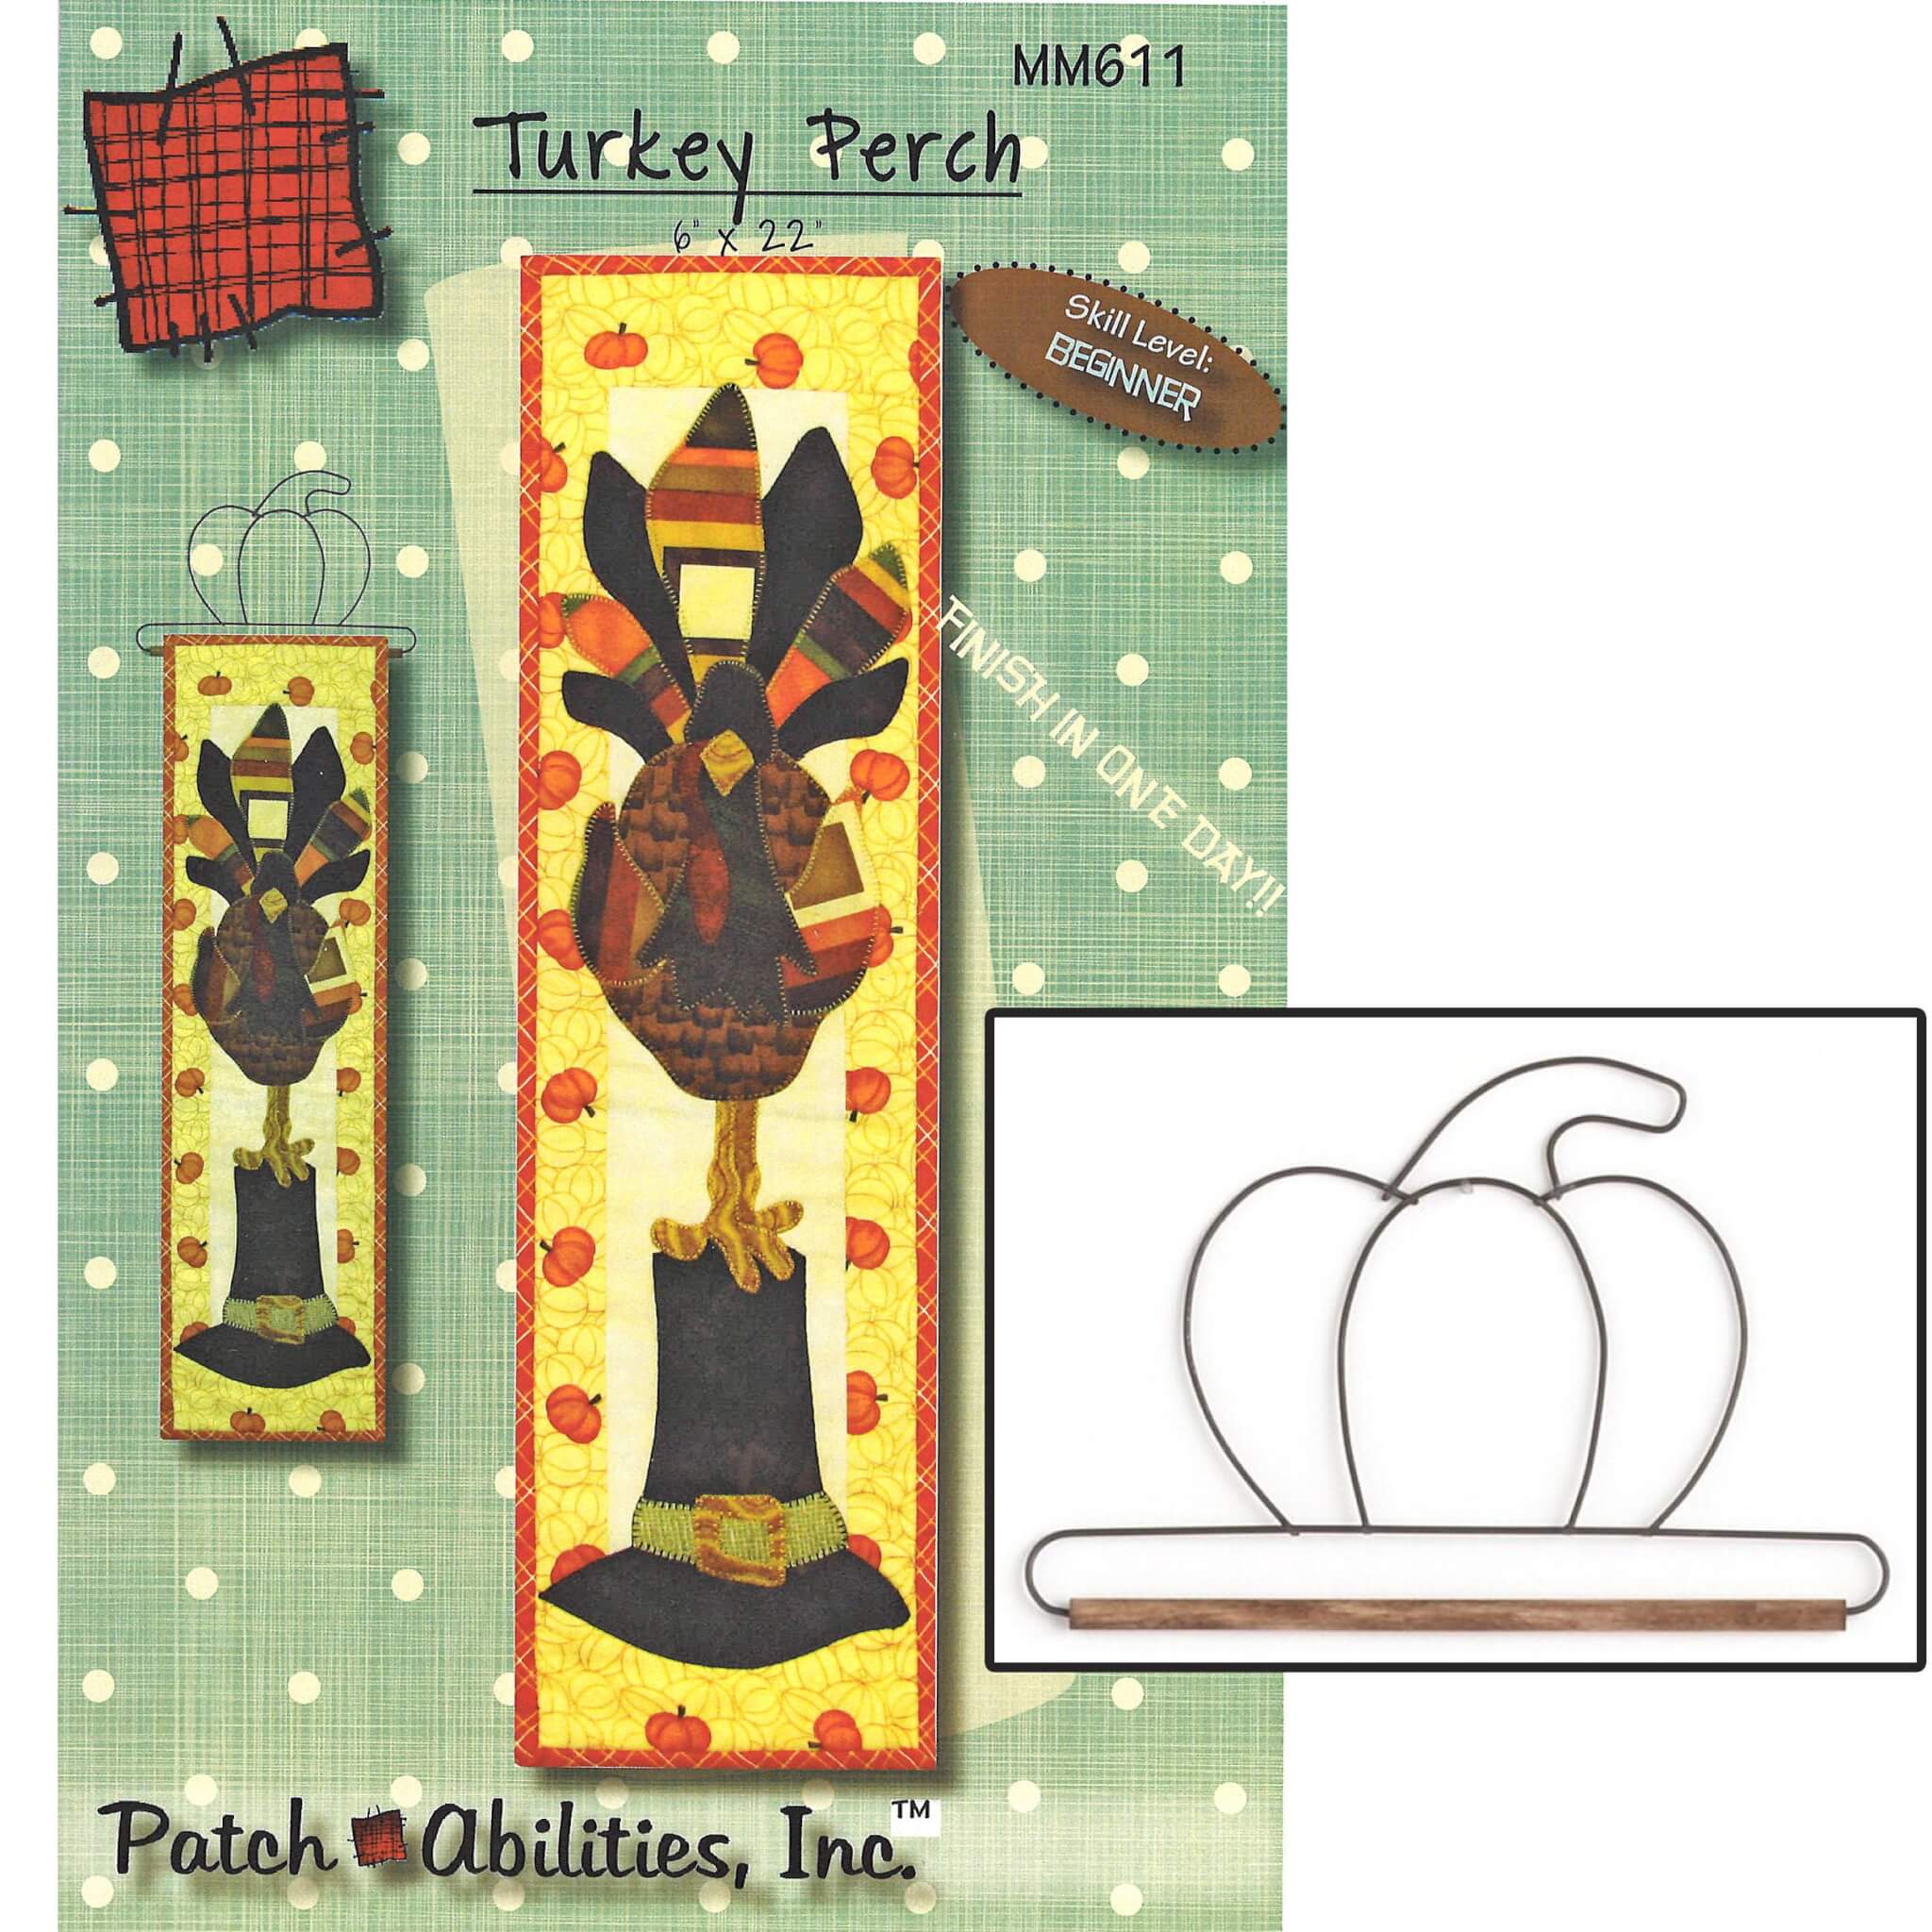 NEW!  Patch Abilities Appliqued Wall Hanging Patterns and Hardware at ShopNZP.com!